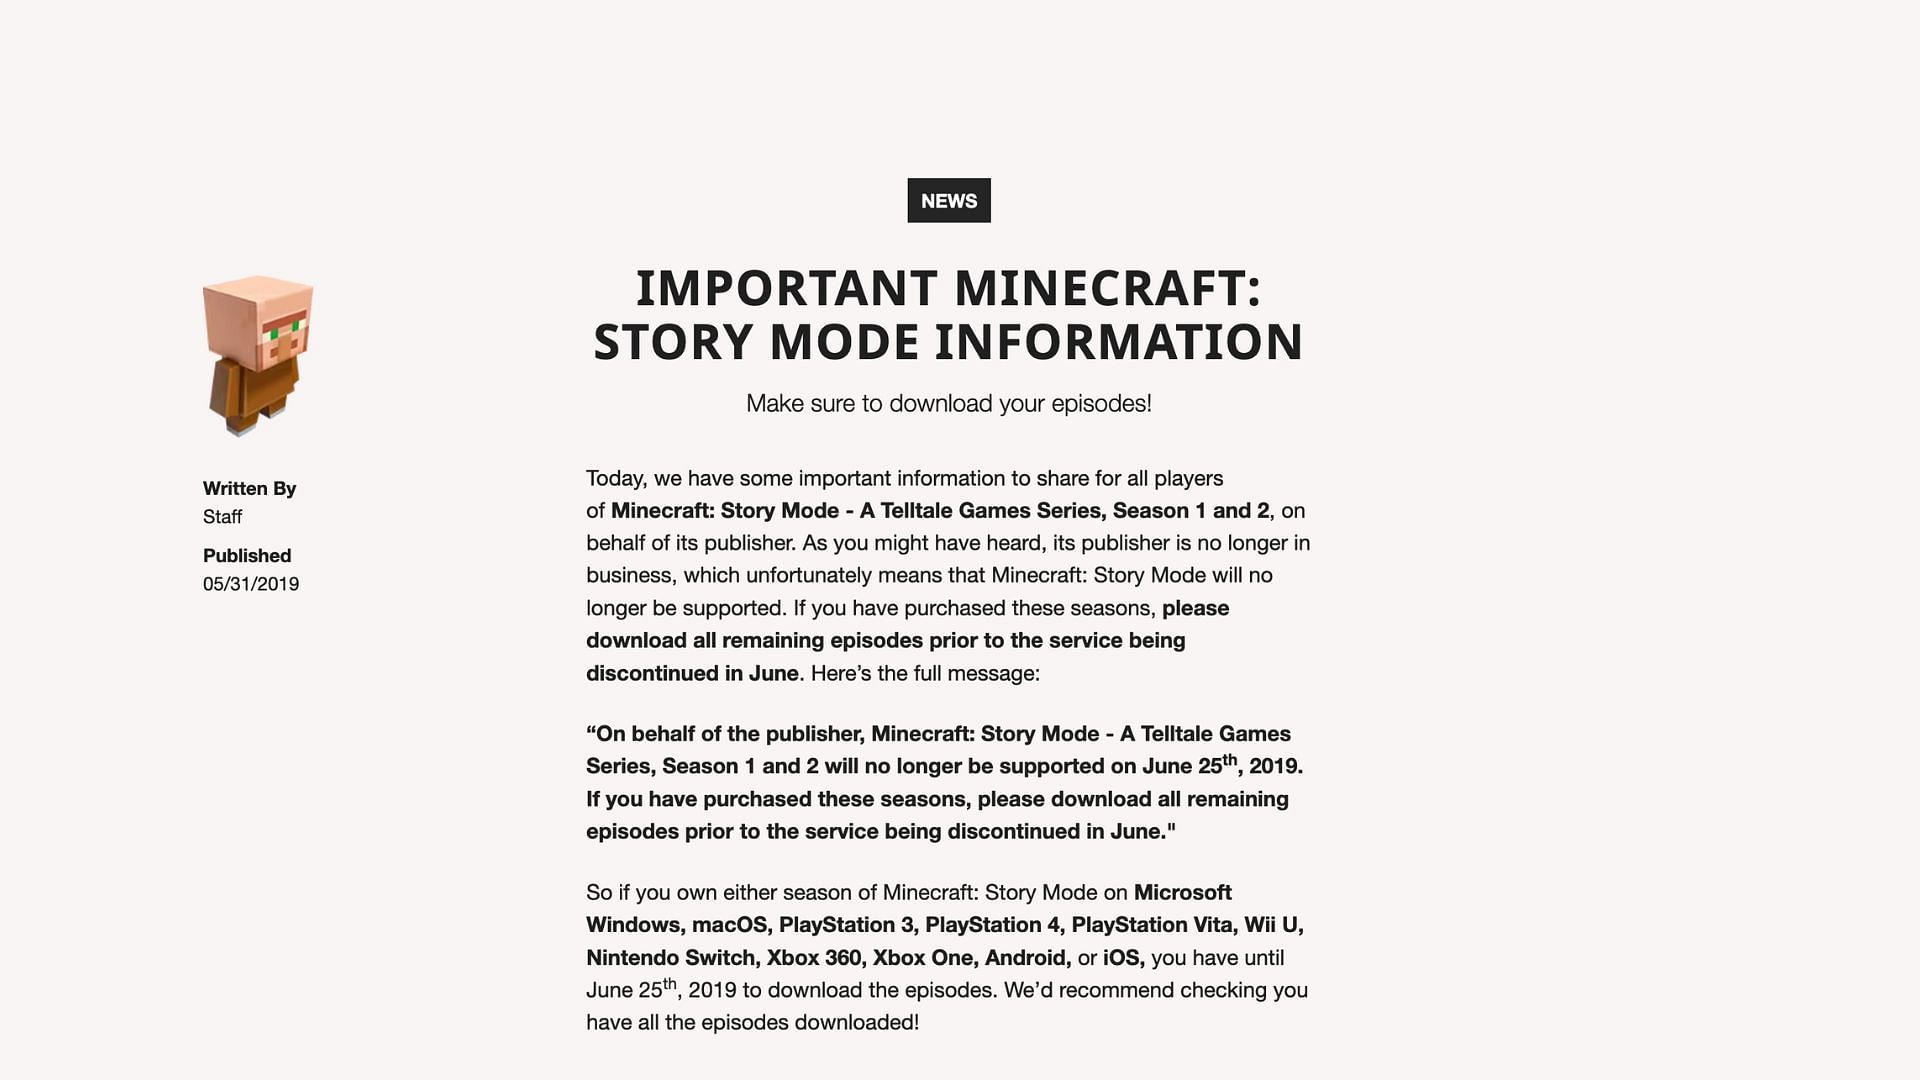 Mojang announcing the end of Story Mode